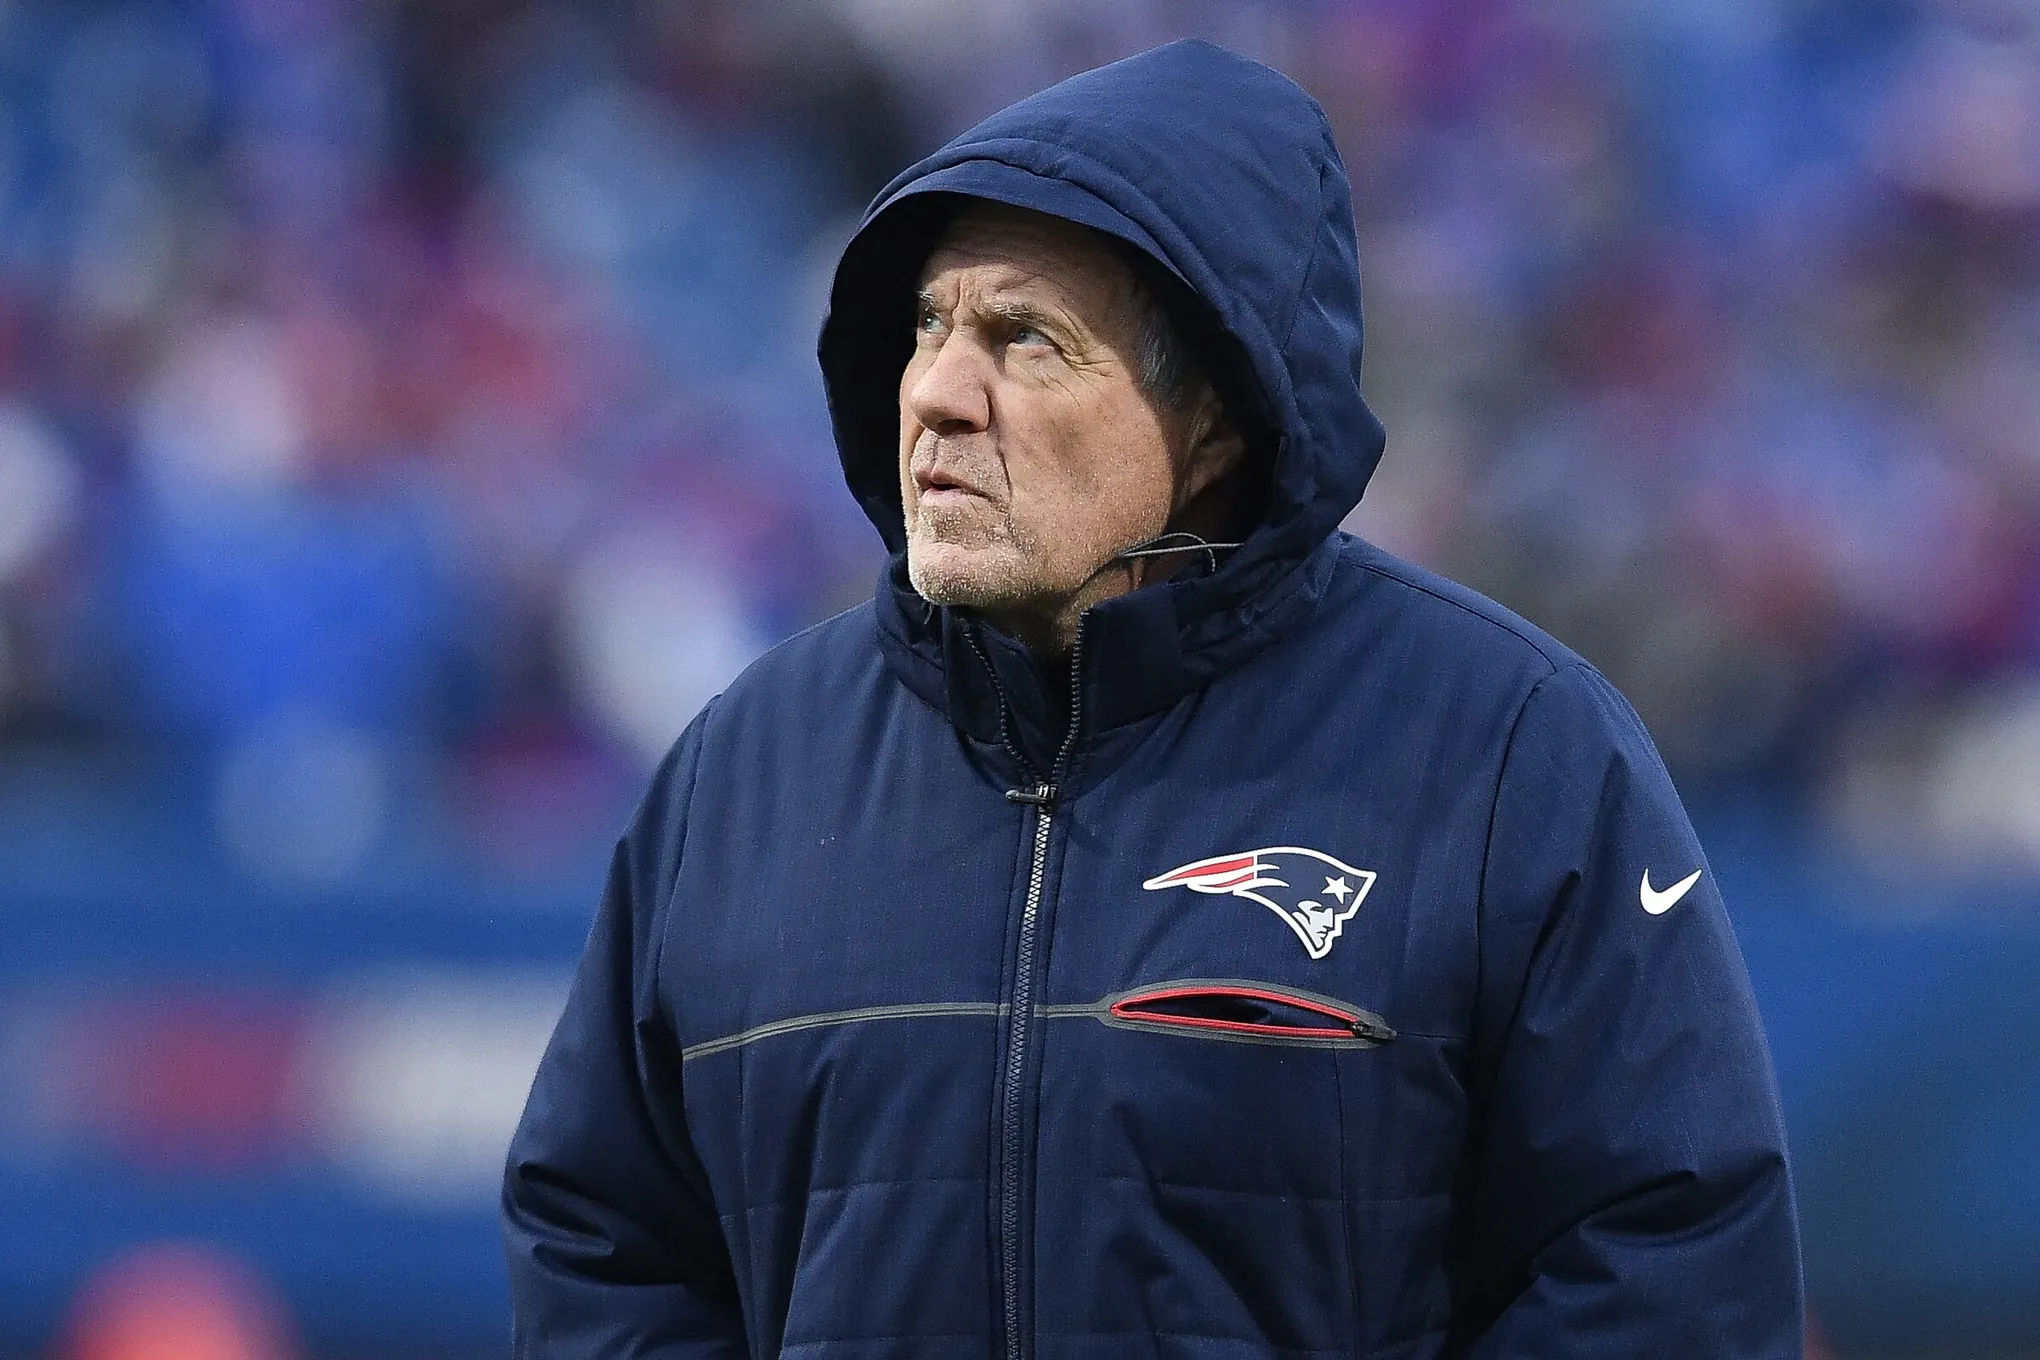 The Untold Story Behind Bill Belichick's Departure A Closer Look at Patriots' Power Dynamics